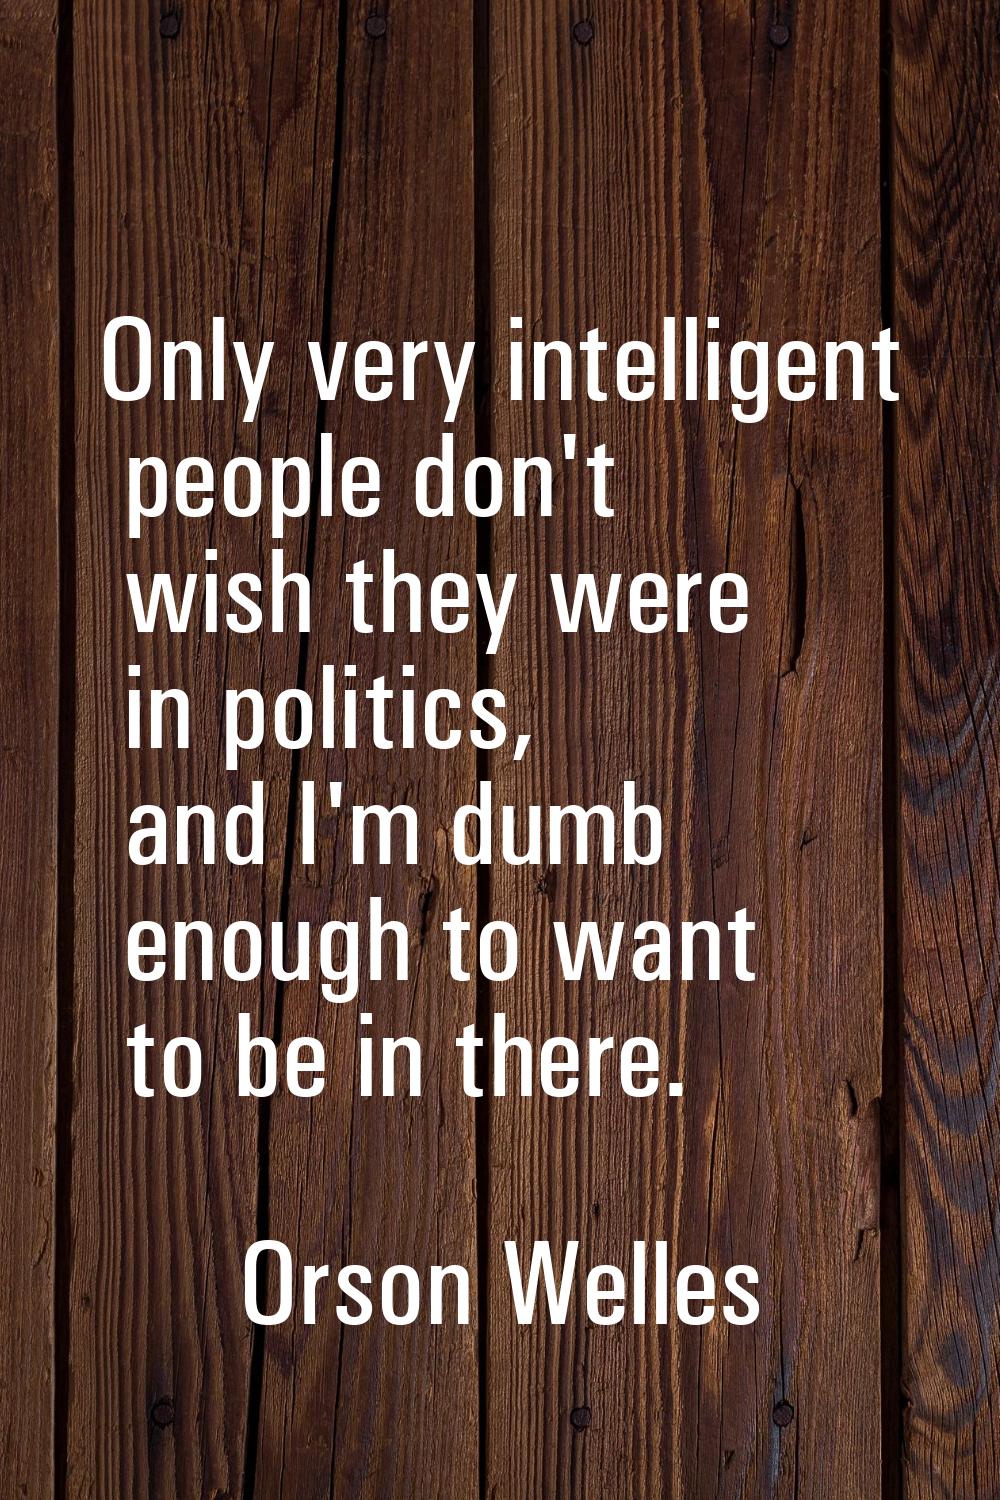 Only very intelligent people don't wish they were in politics, and I'm dumb enough to want to be in